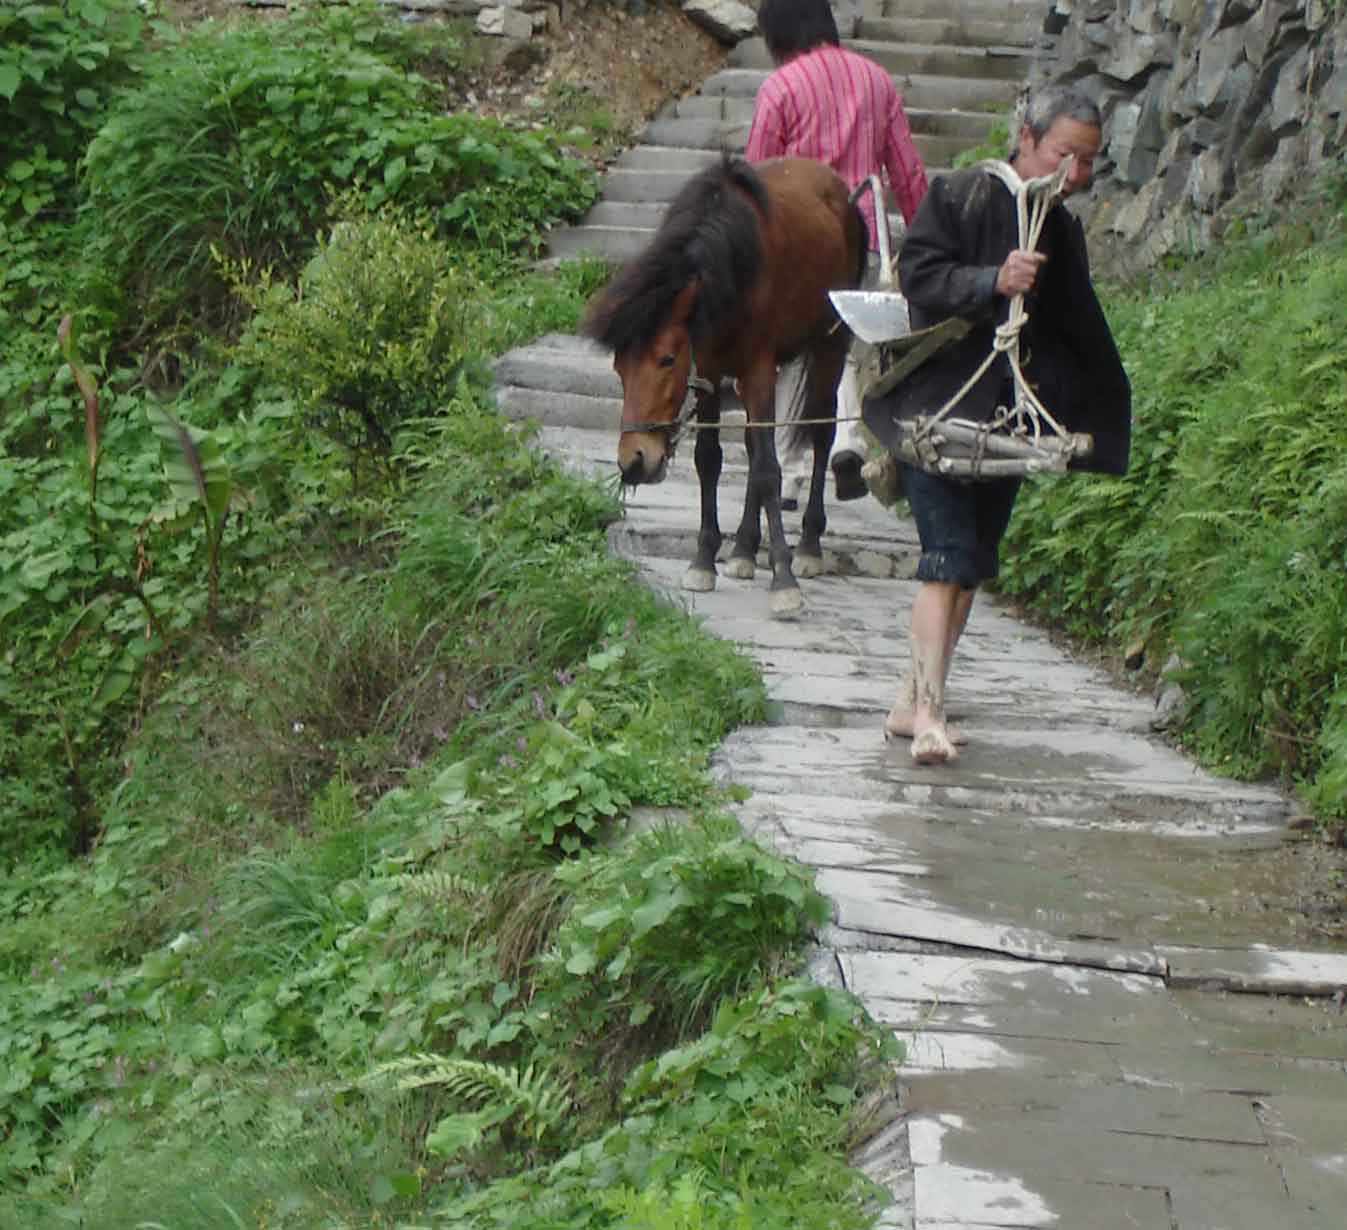 Villager leading horse and carrying hoeing implement